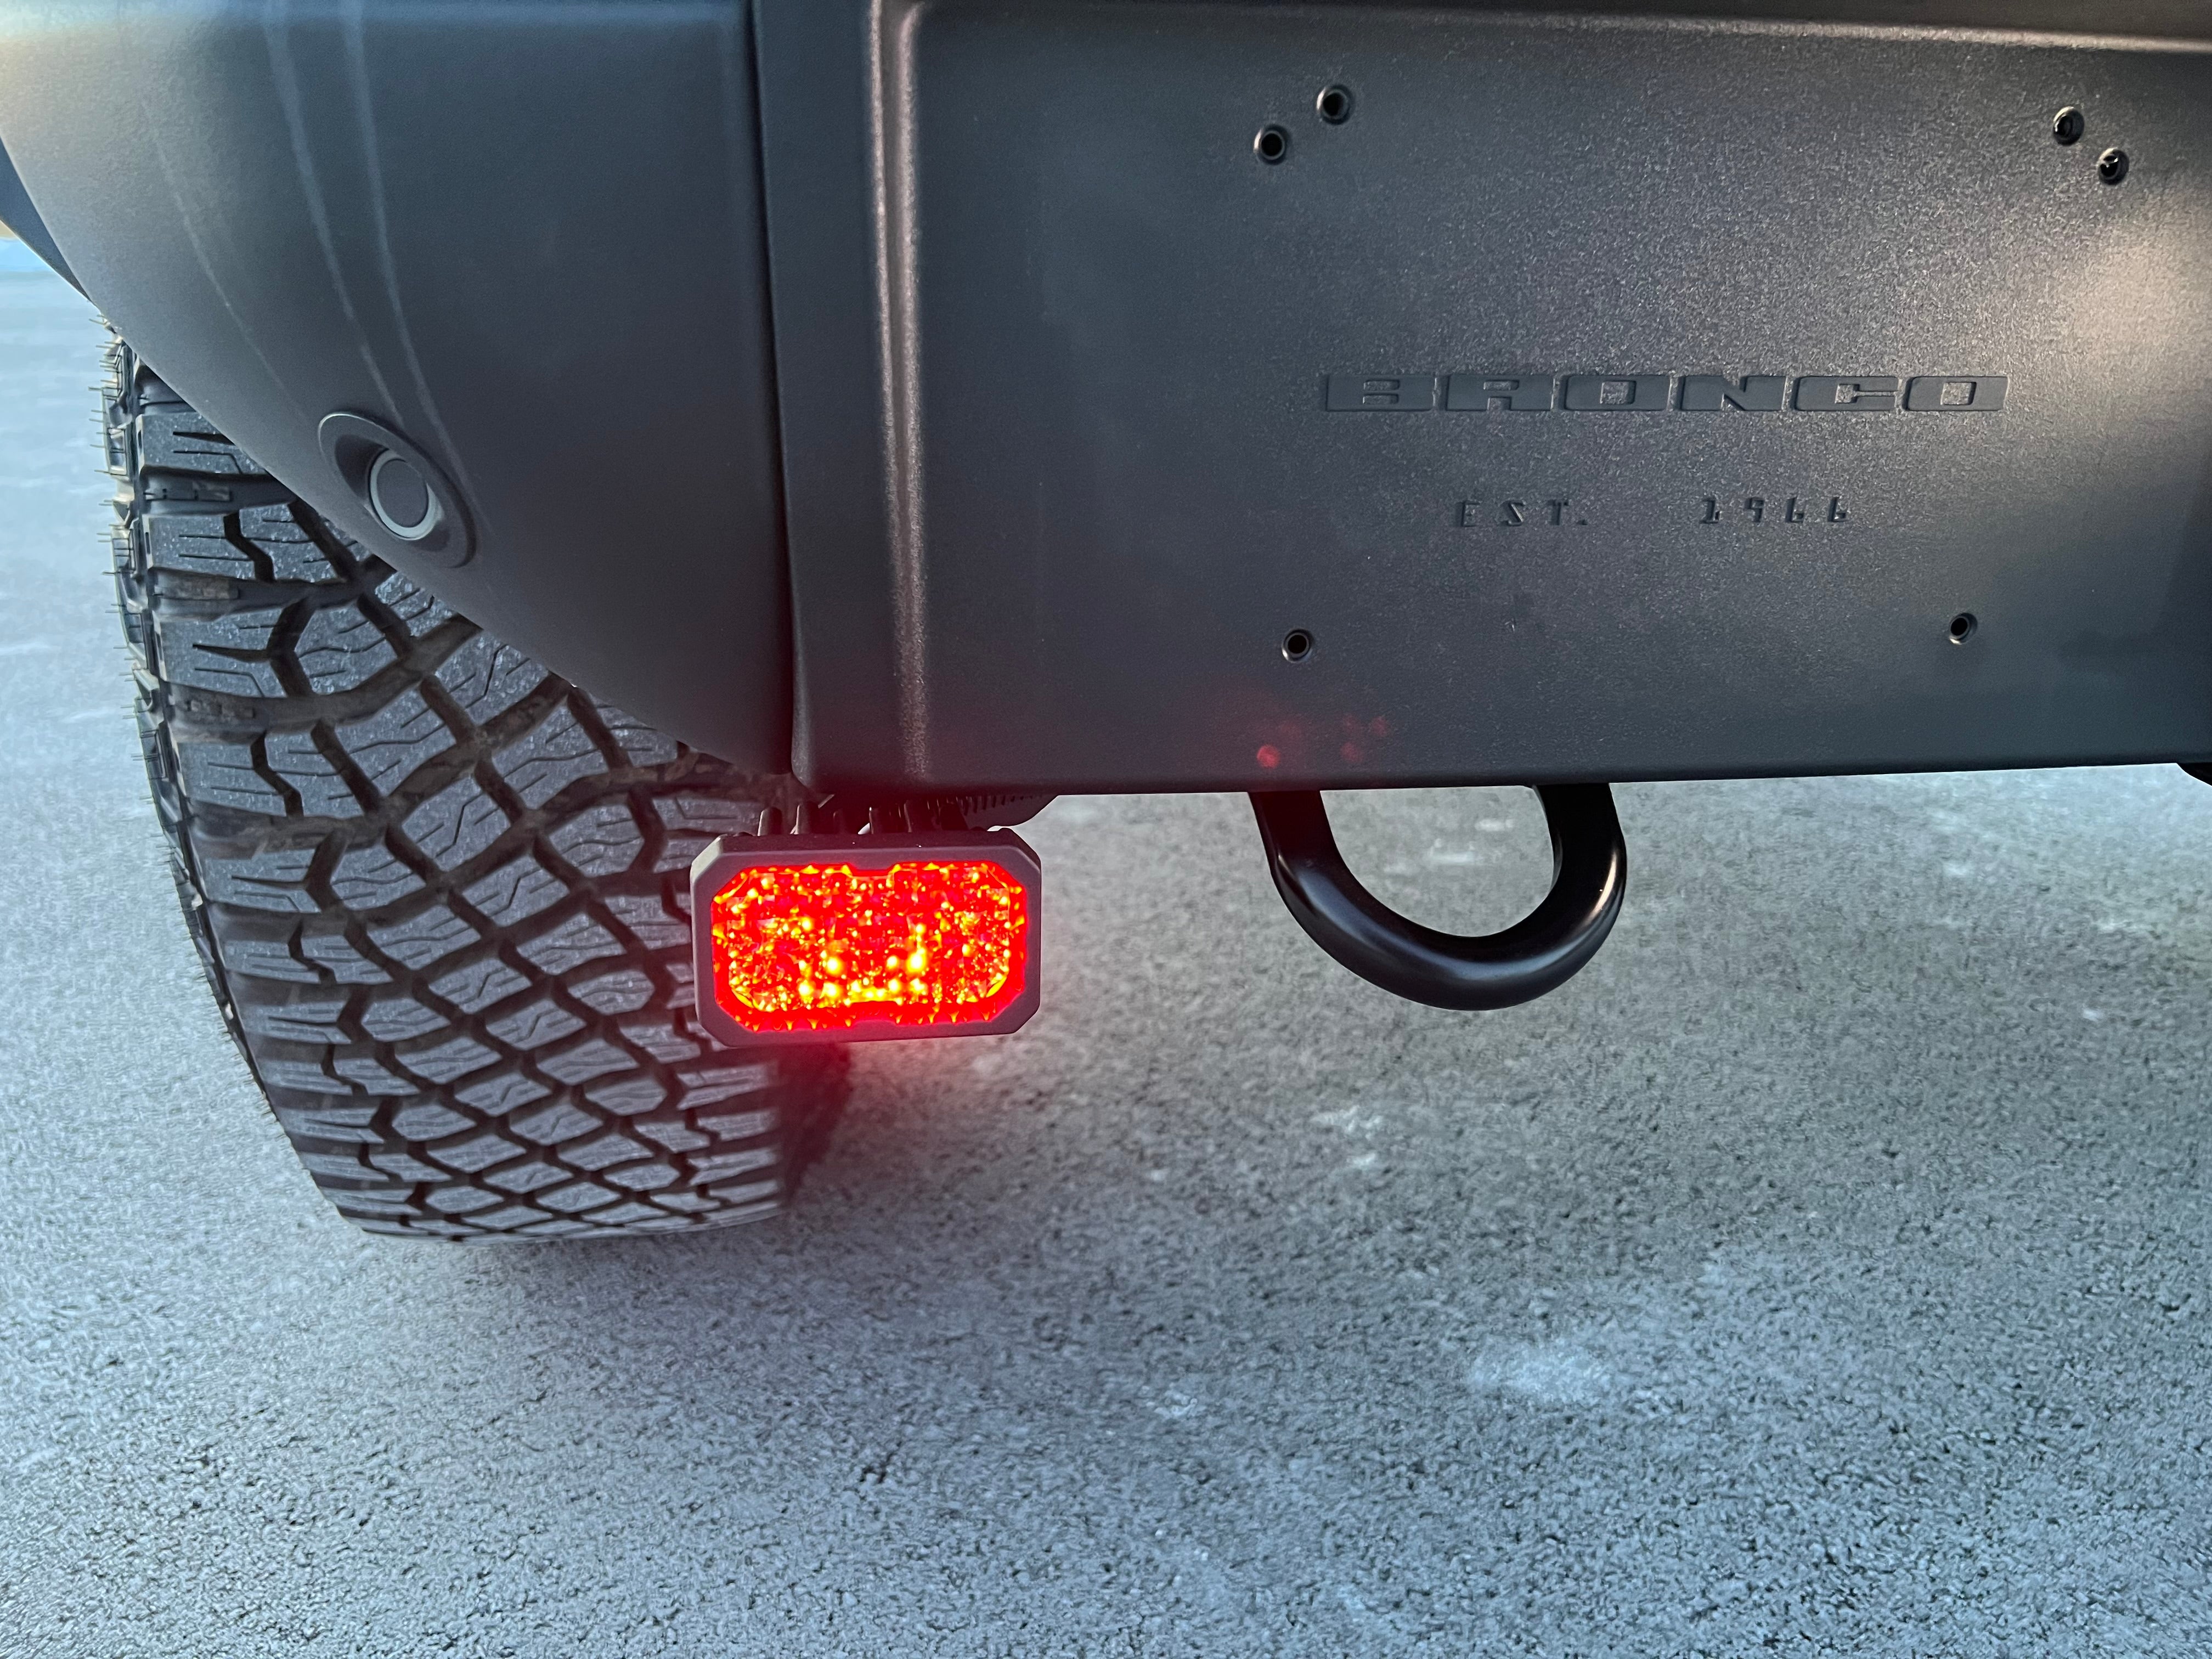 SPV Parts Extended Rear Light Mounts - (Fits 15+ F-250/350 Super Duty and others) Mount Rigid, Baja Designs, Diode Dynamics and more